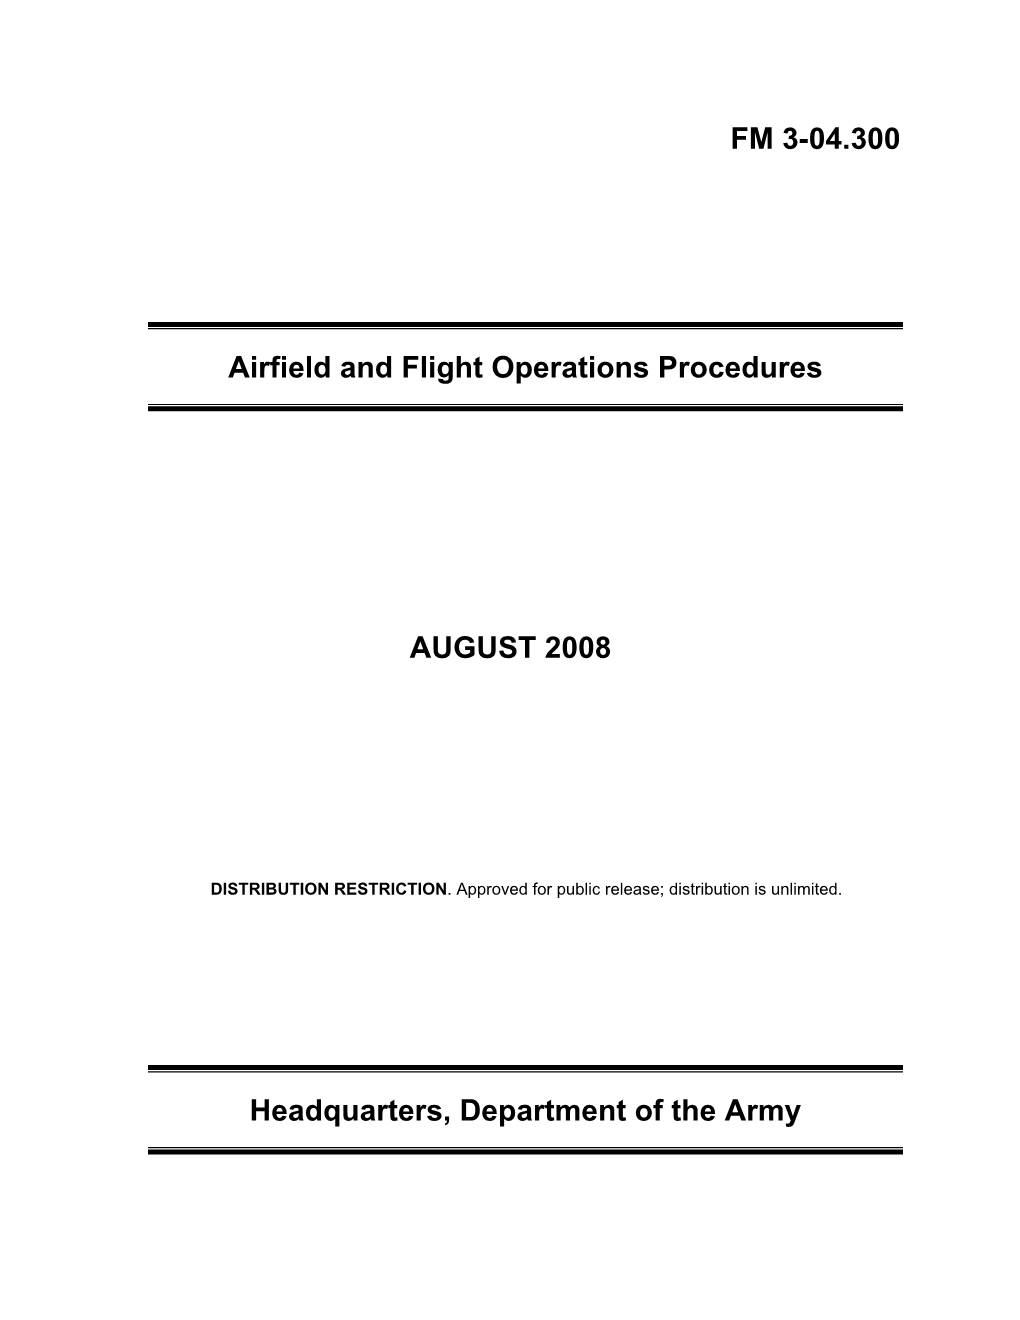 FM 3-04.300 Airfield and Flight Operations Procedures